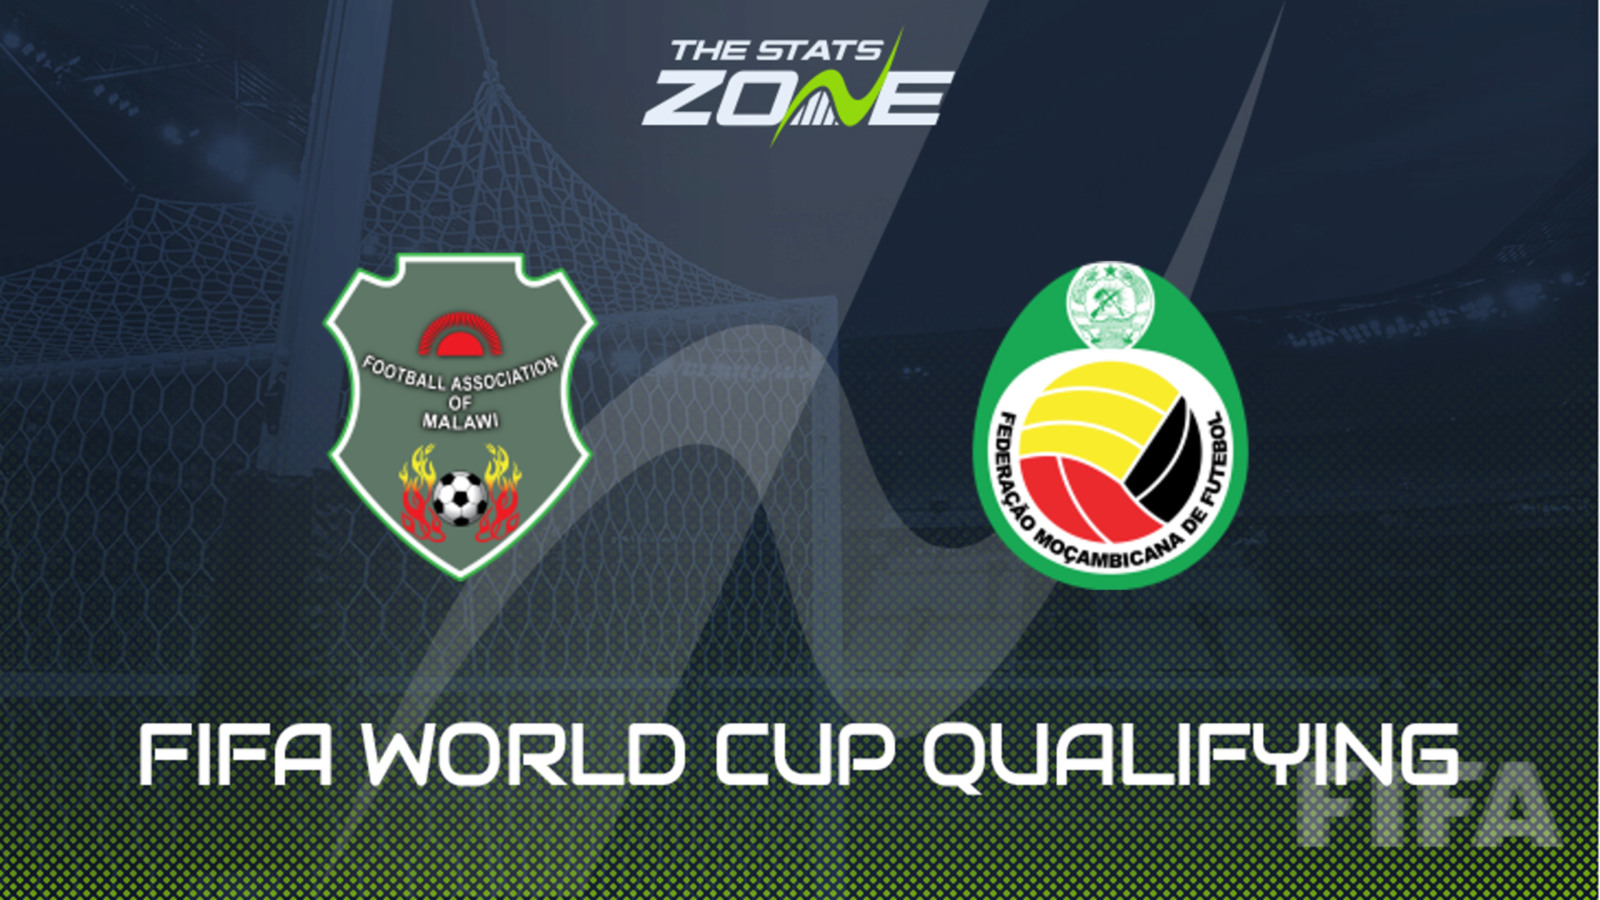 Video Clip Highlights: Mozambique vs Malawi- VL World Cup 2022